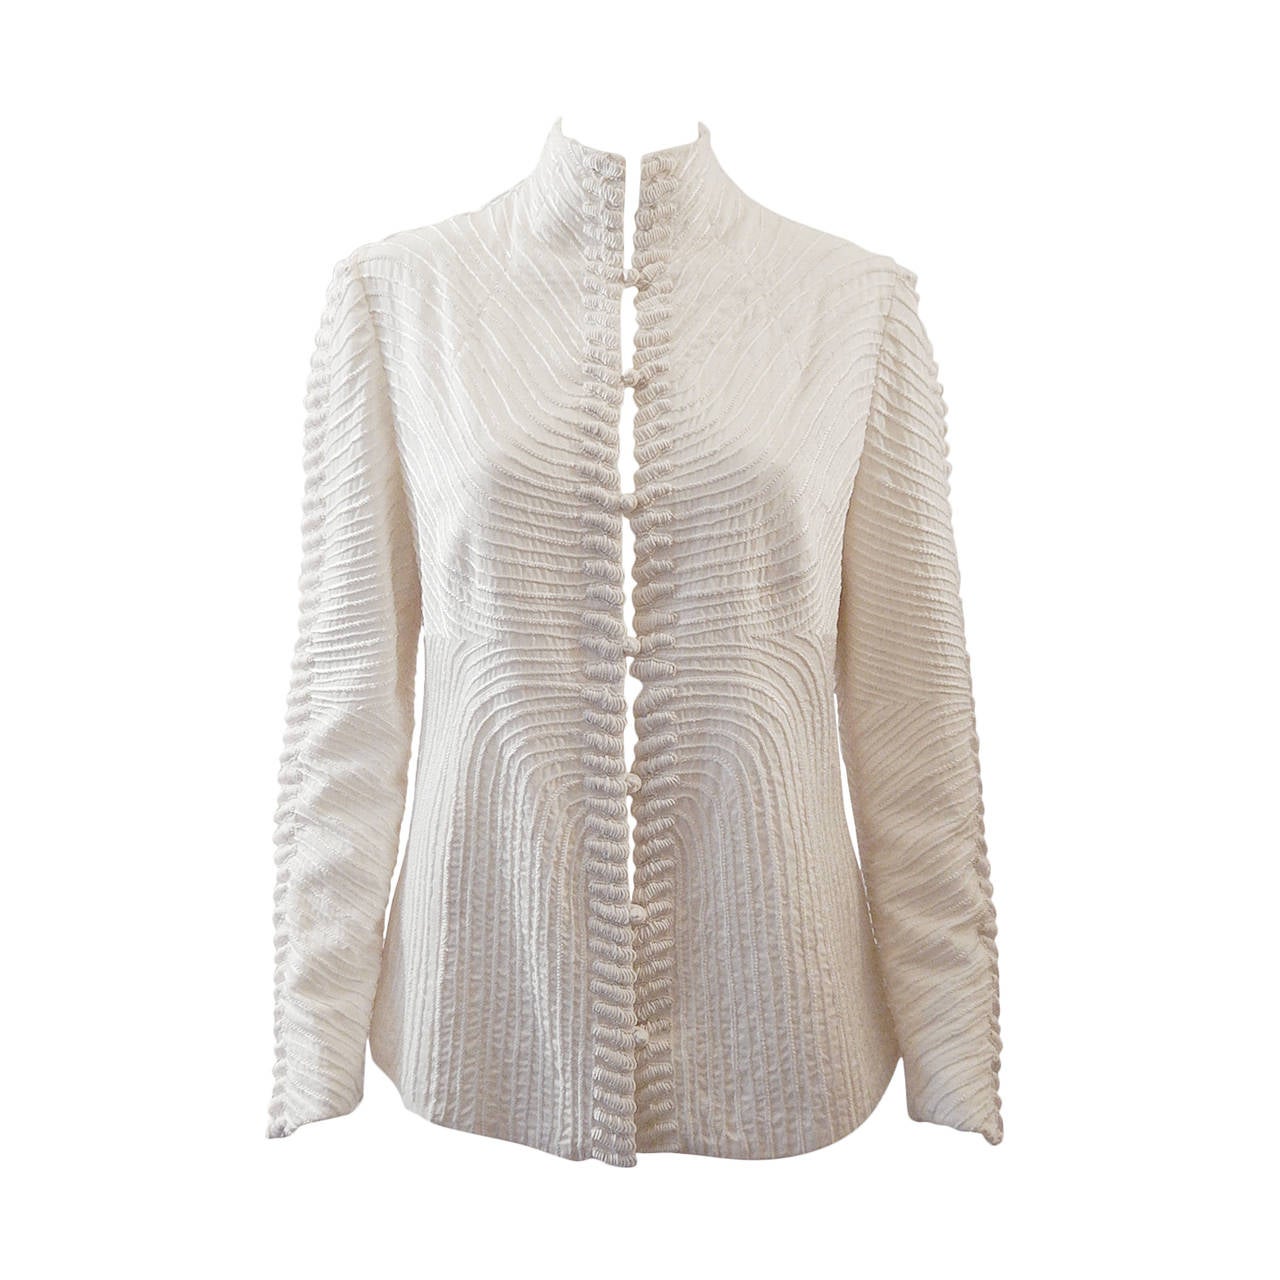 Chado Ralph Rucci Jacket from his book "The Art of Weightlessness"  For Sale